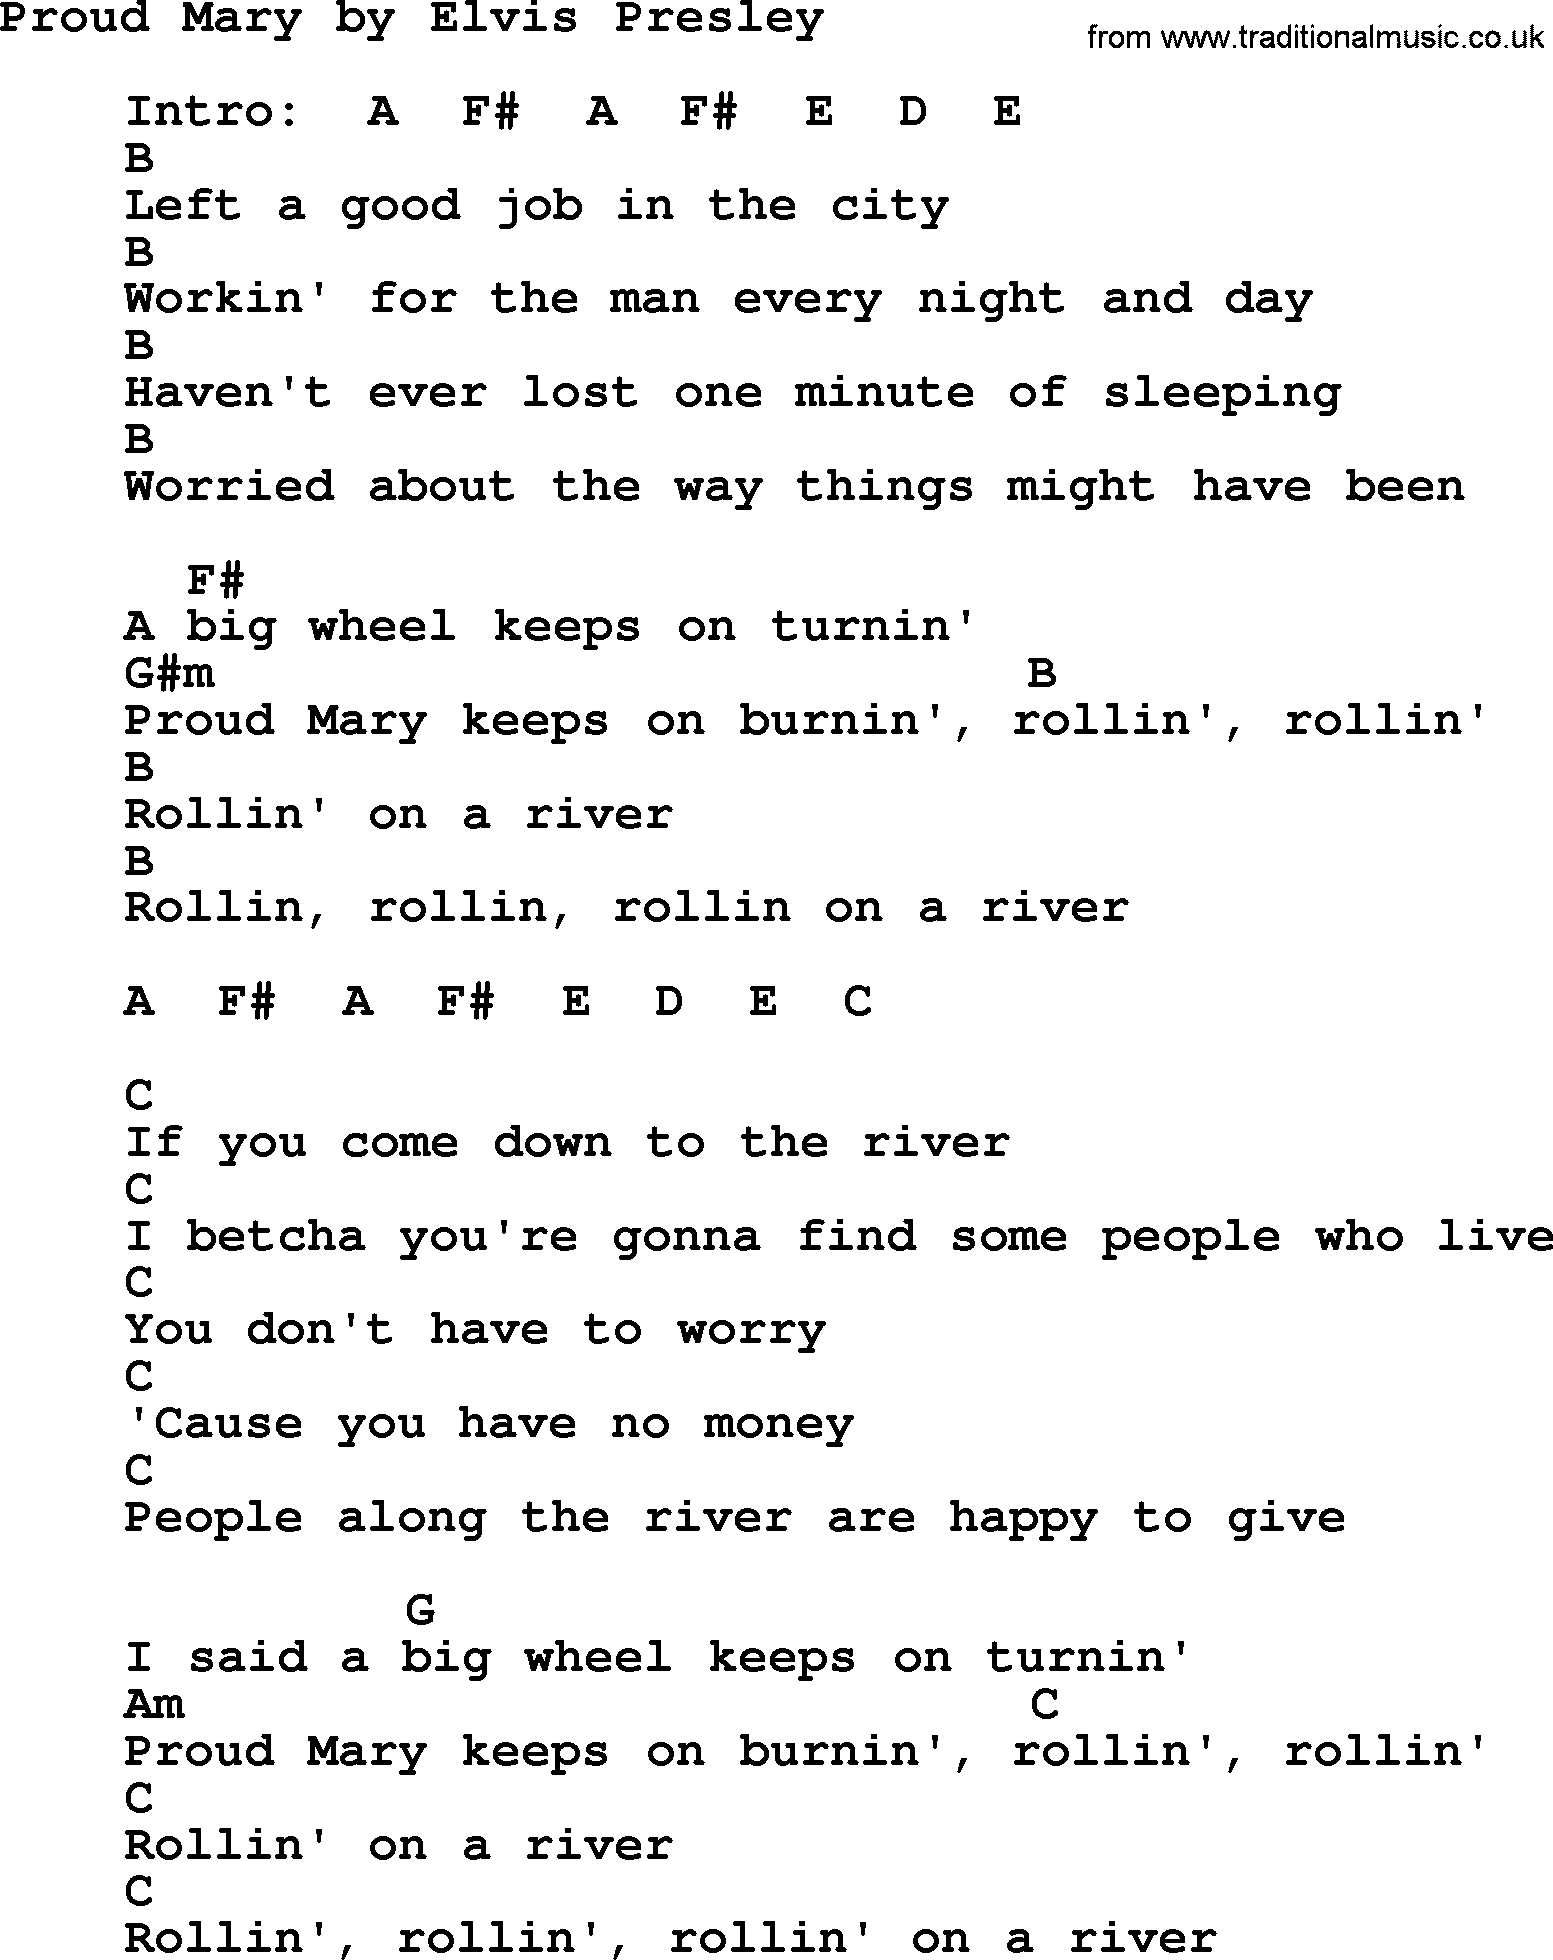 proud mary riverboat queen lyrics